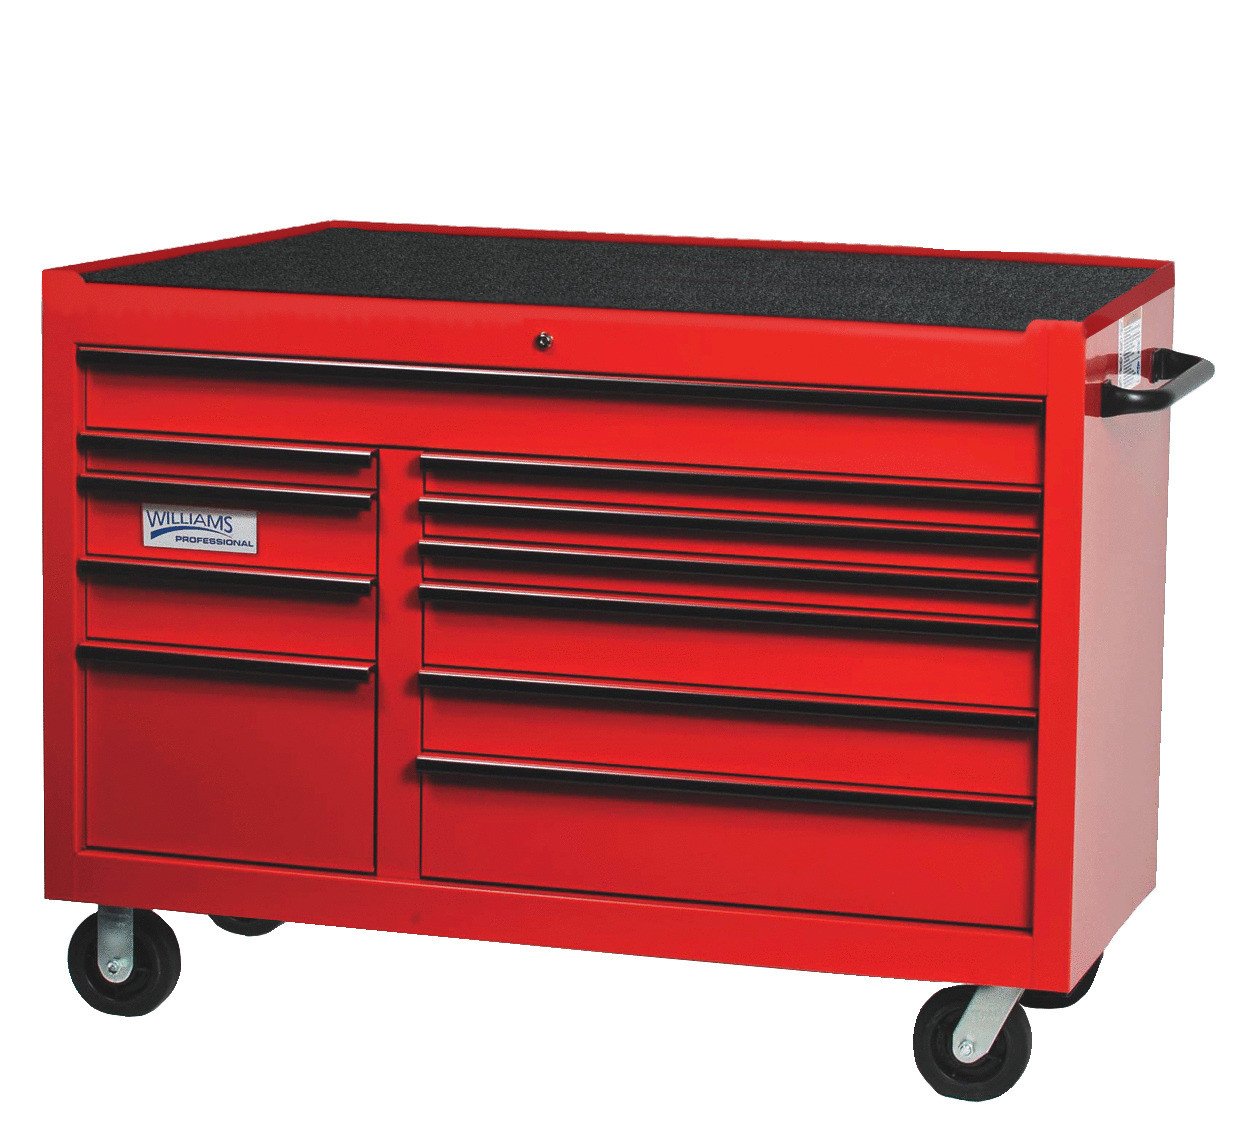 55" Williams Roller Cabinet - 11 Drawer - Red - W55RC11